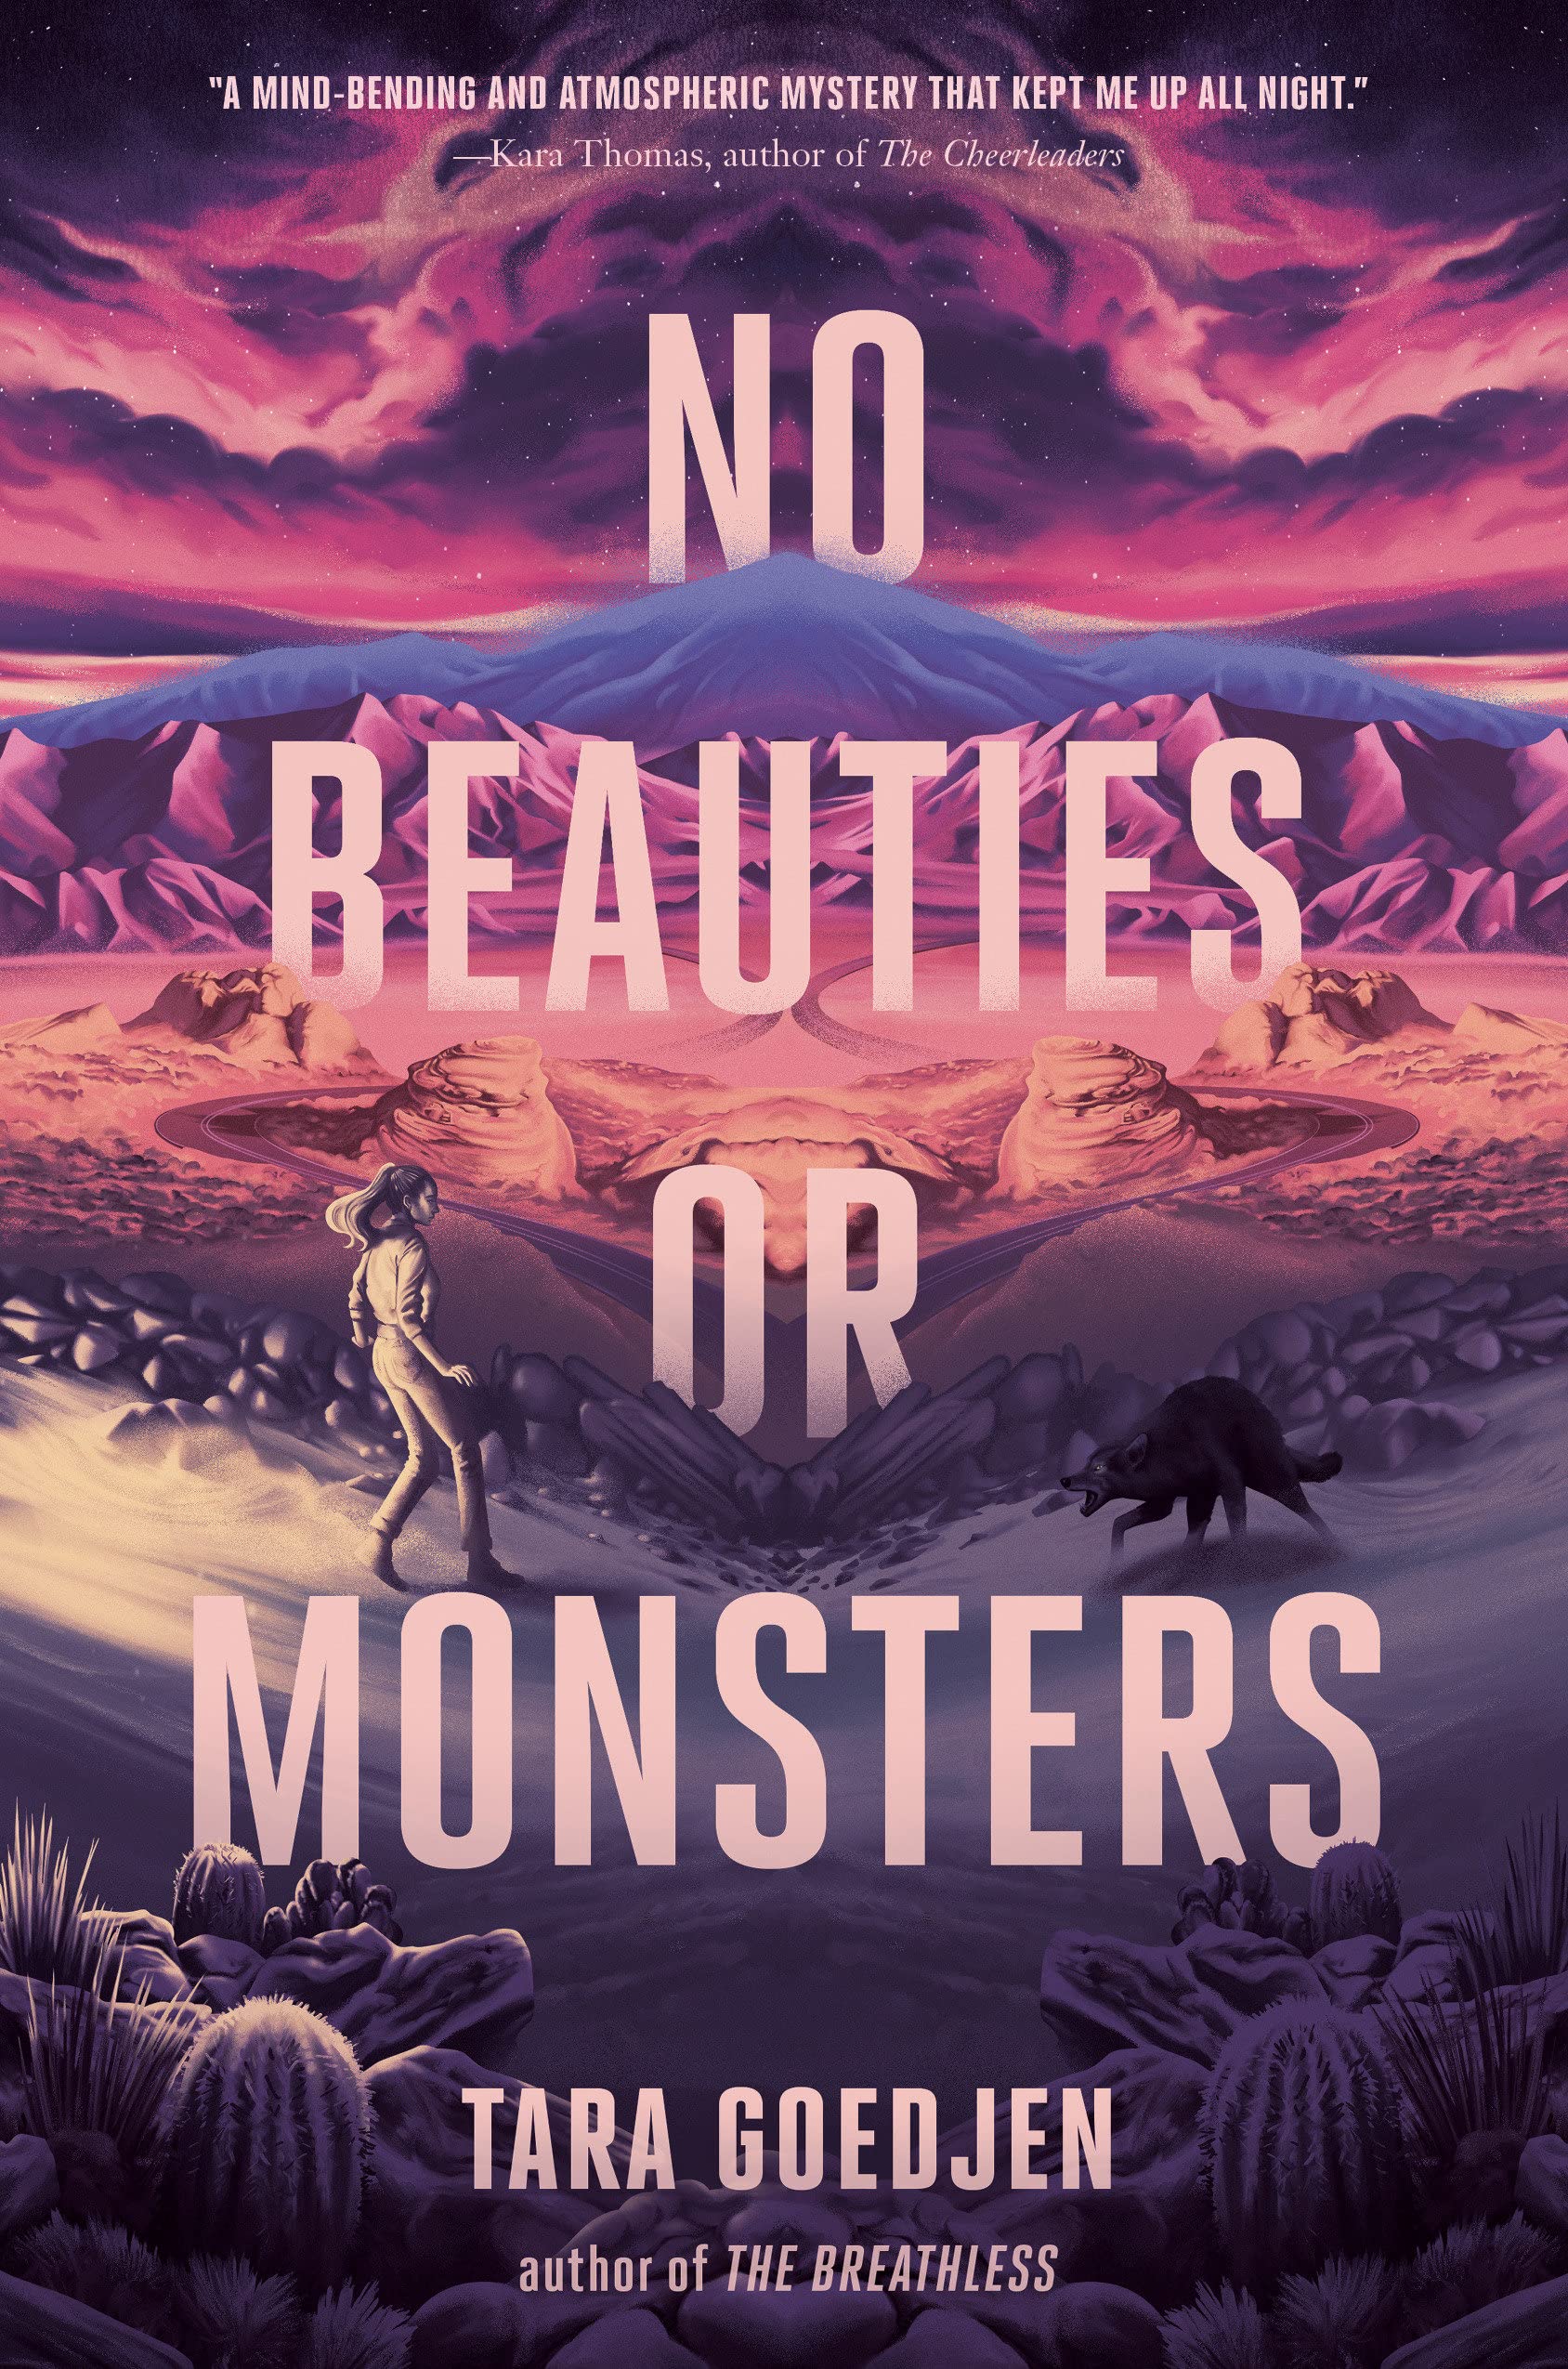 Cover of “No Beauties or Monsters” by Tara Goedjen